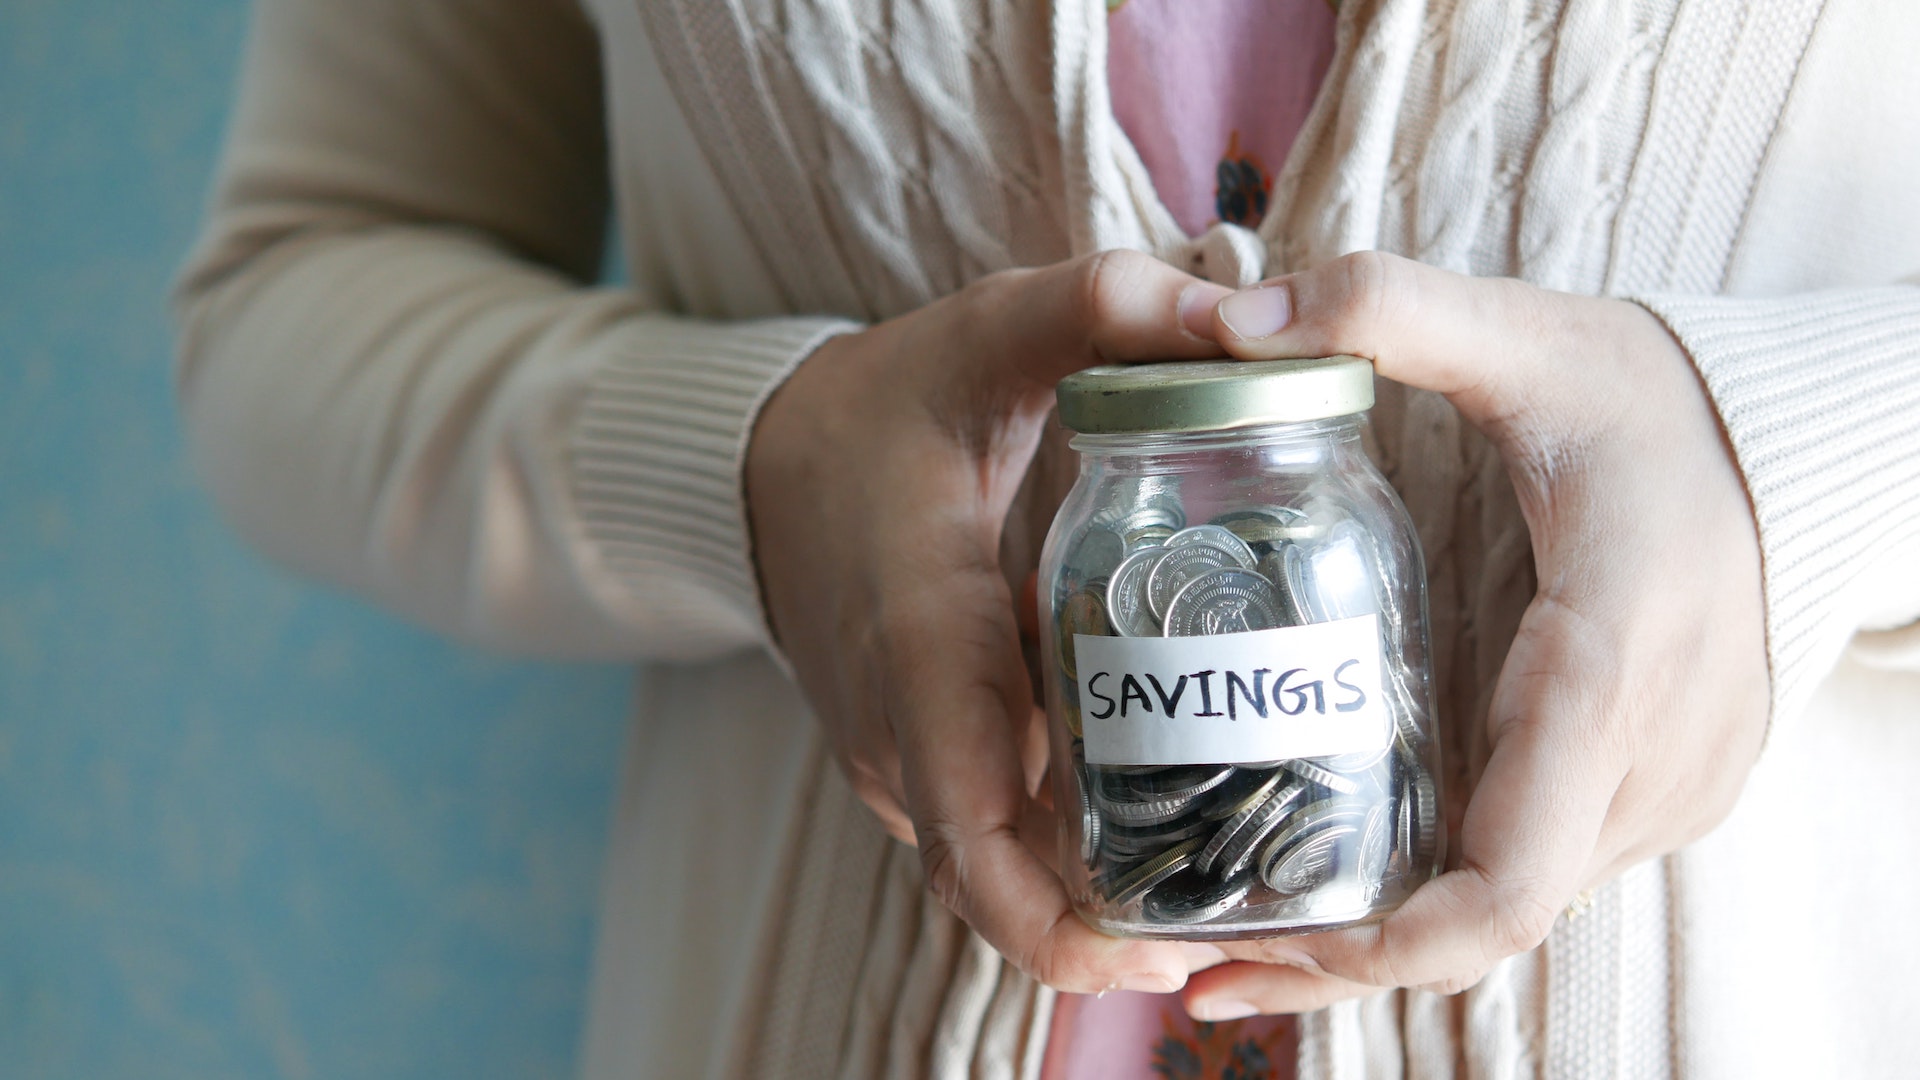 A woman holds a glass jar marked "savings" with pennies in it